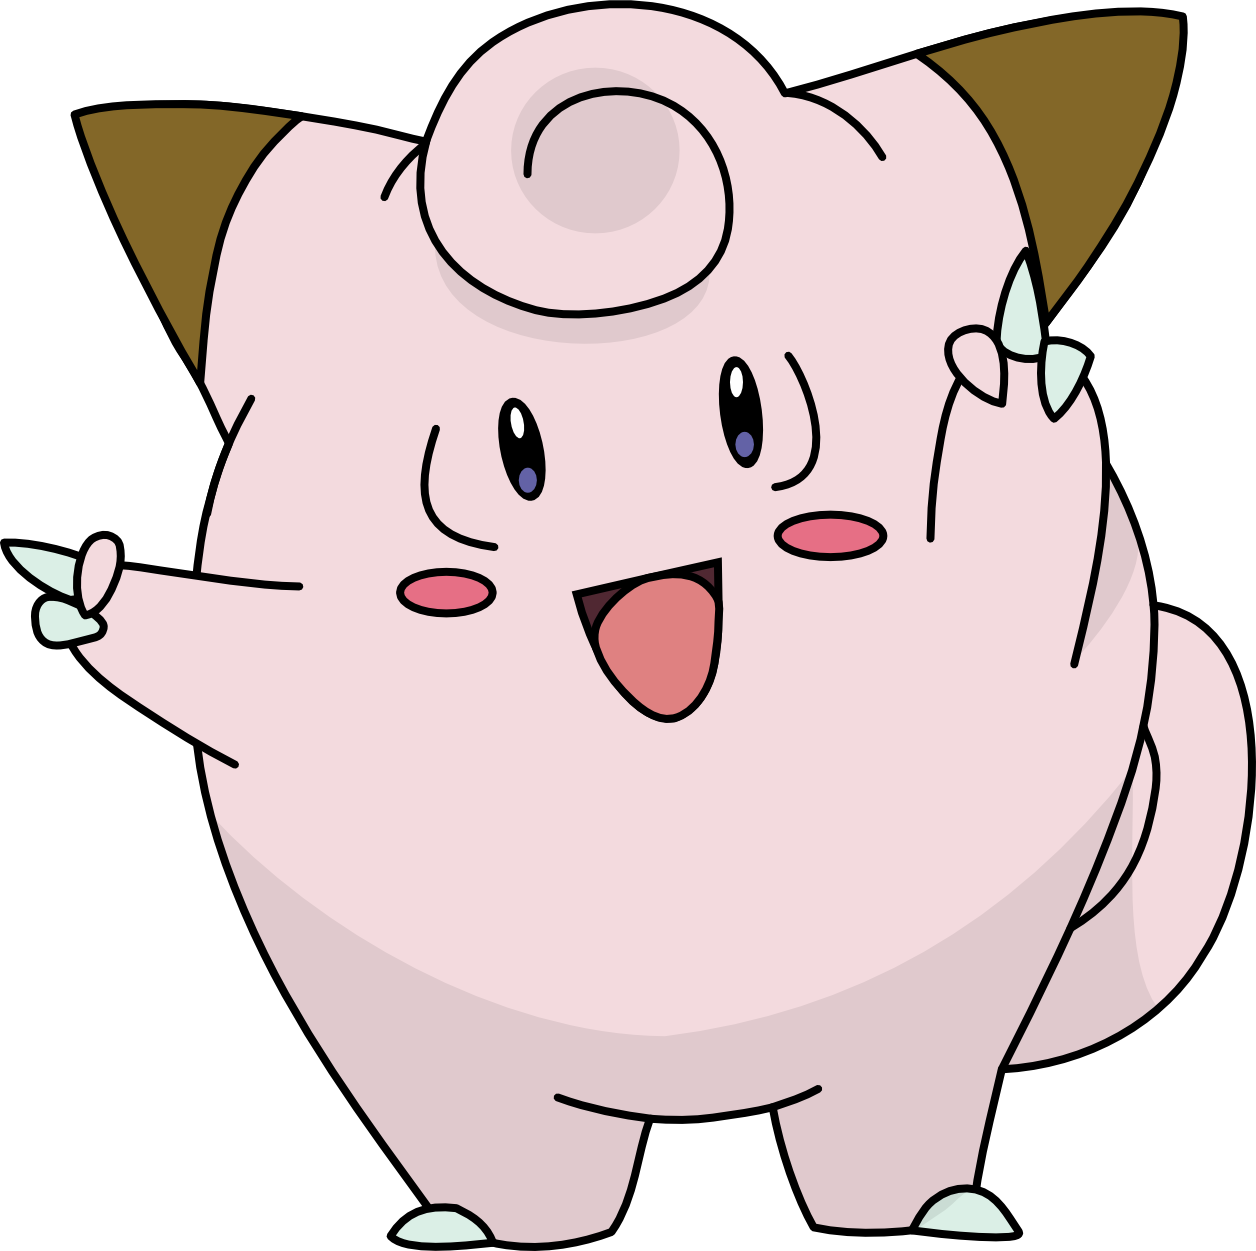 Free download clefairy full hd pictures x for your desktop mobile tablet explore clefairy hd wallpapers desktop background hd desktop wallpapers hd snow wallpaper hd